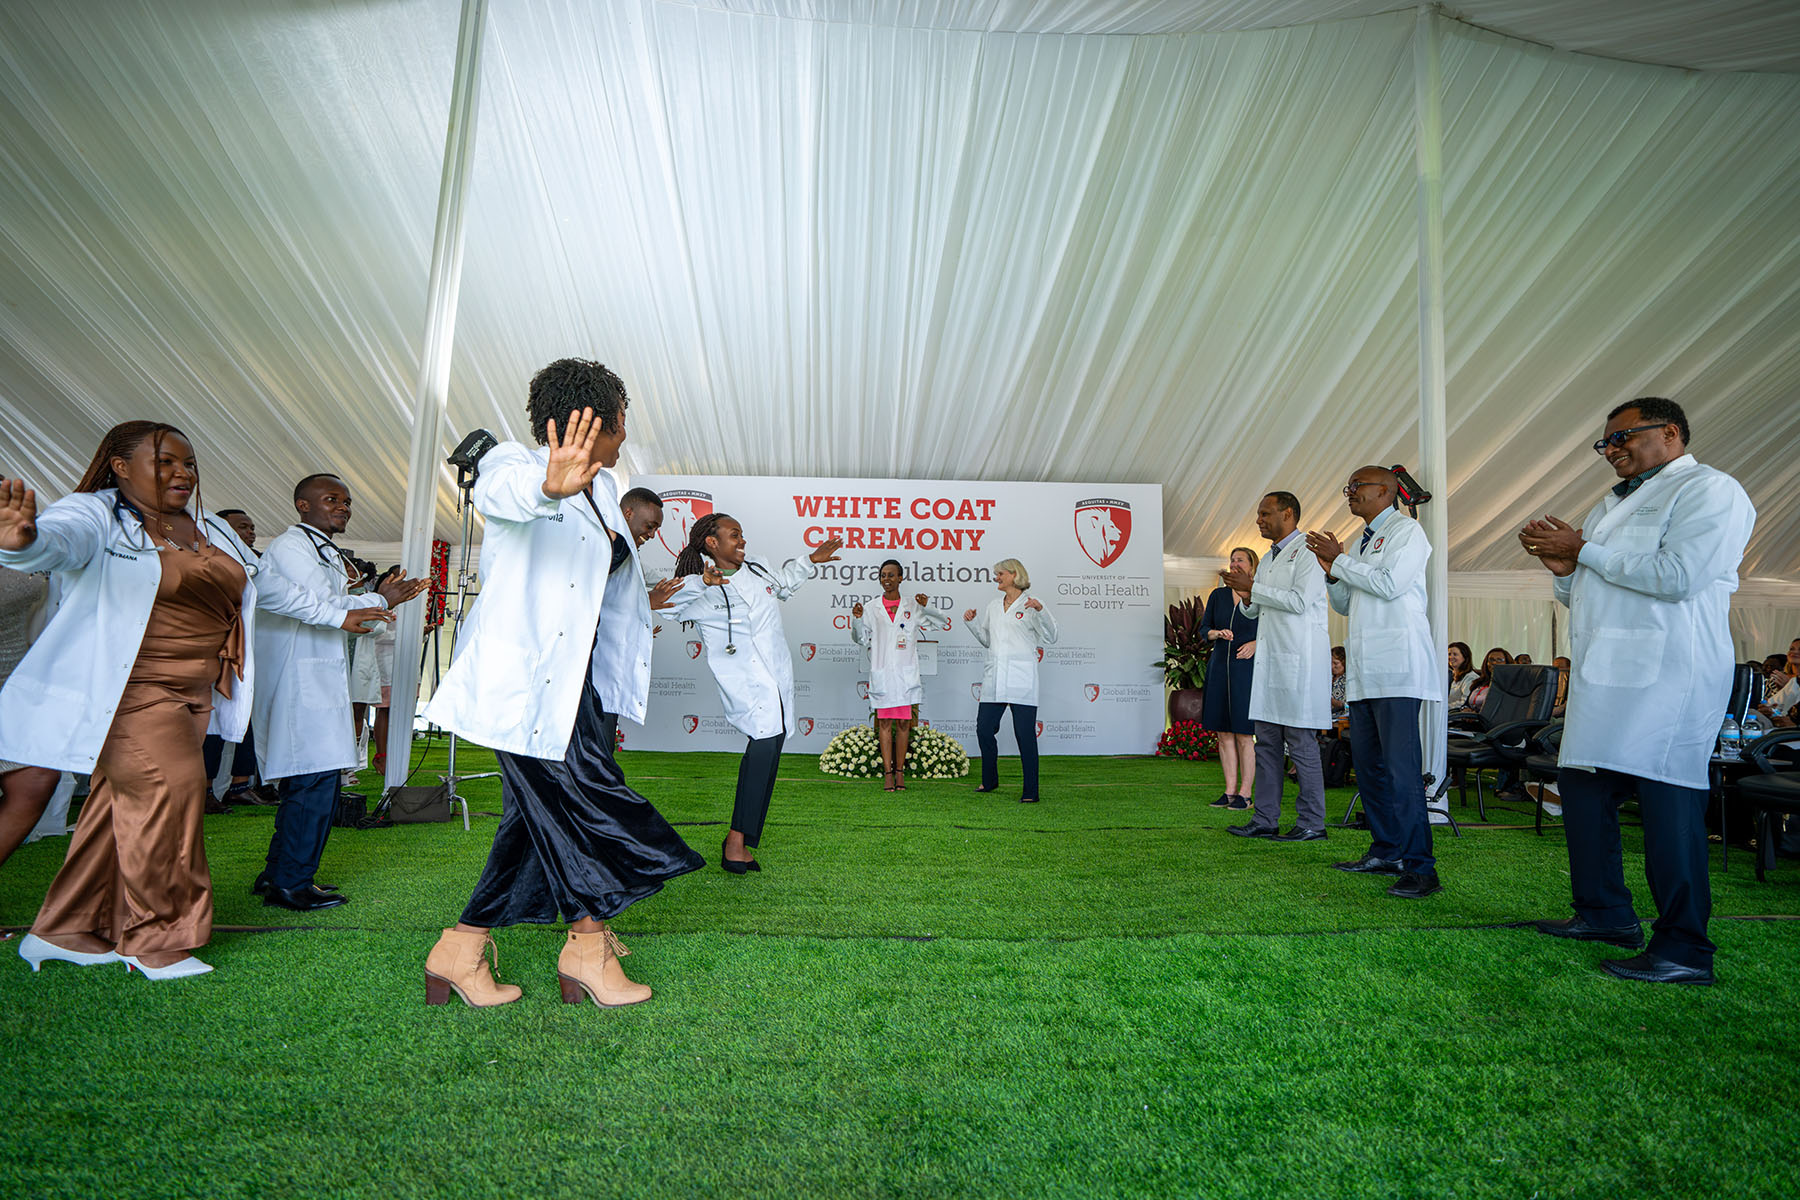 People dancing under a tent  with astroturf under foot clapping and wearing lab coats. 